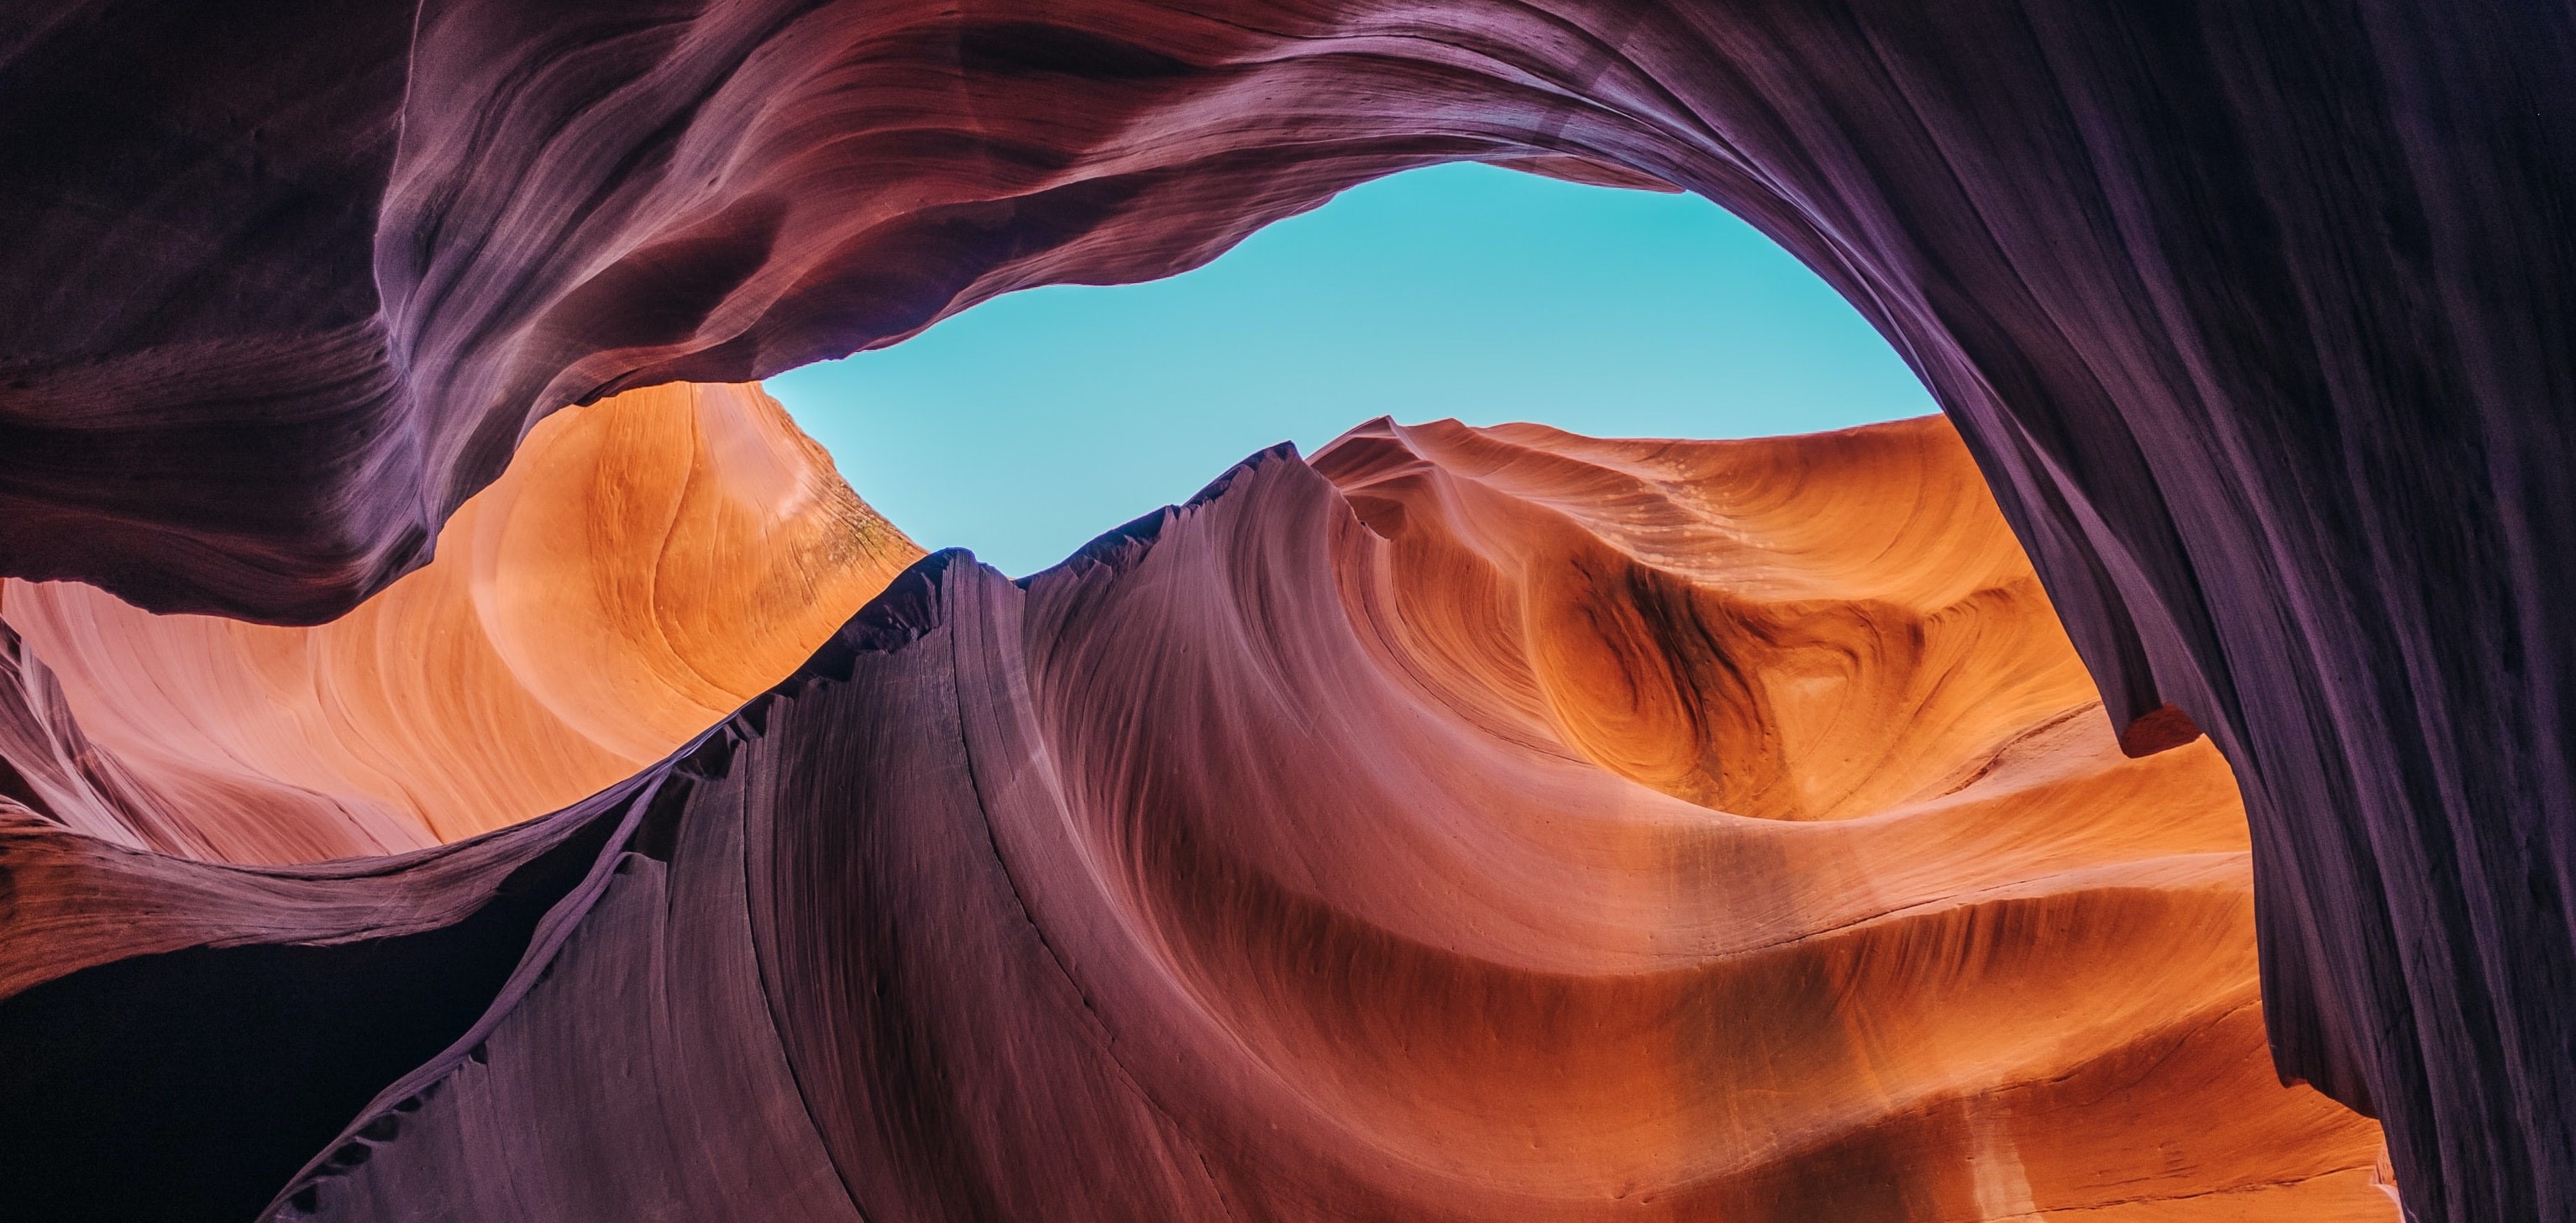 A photo of a swirling red rock canyon